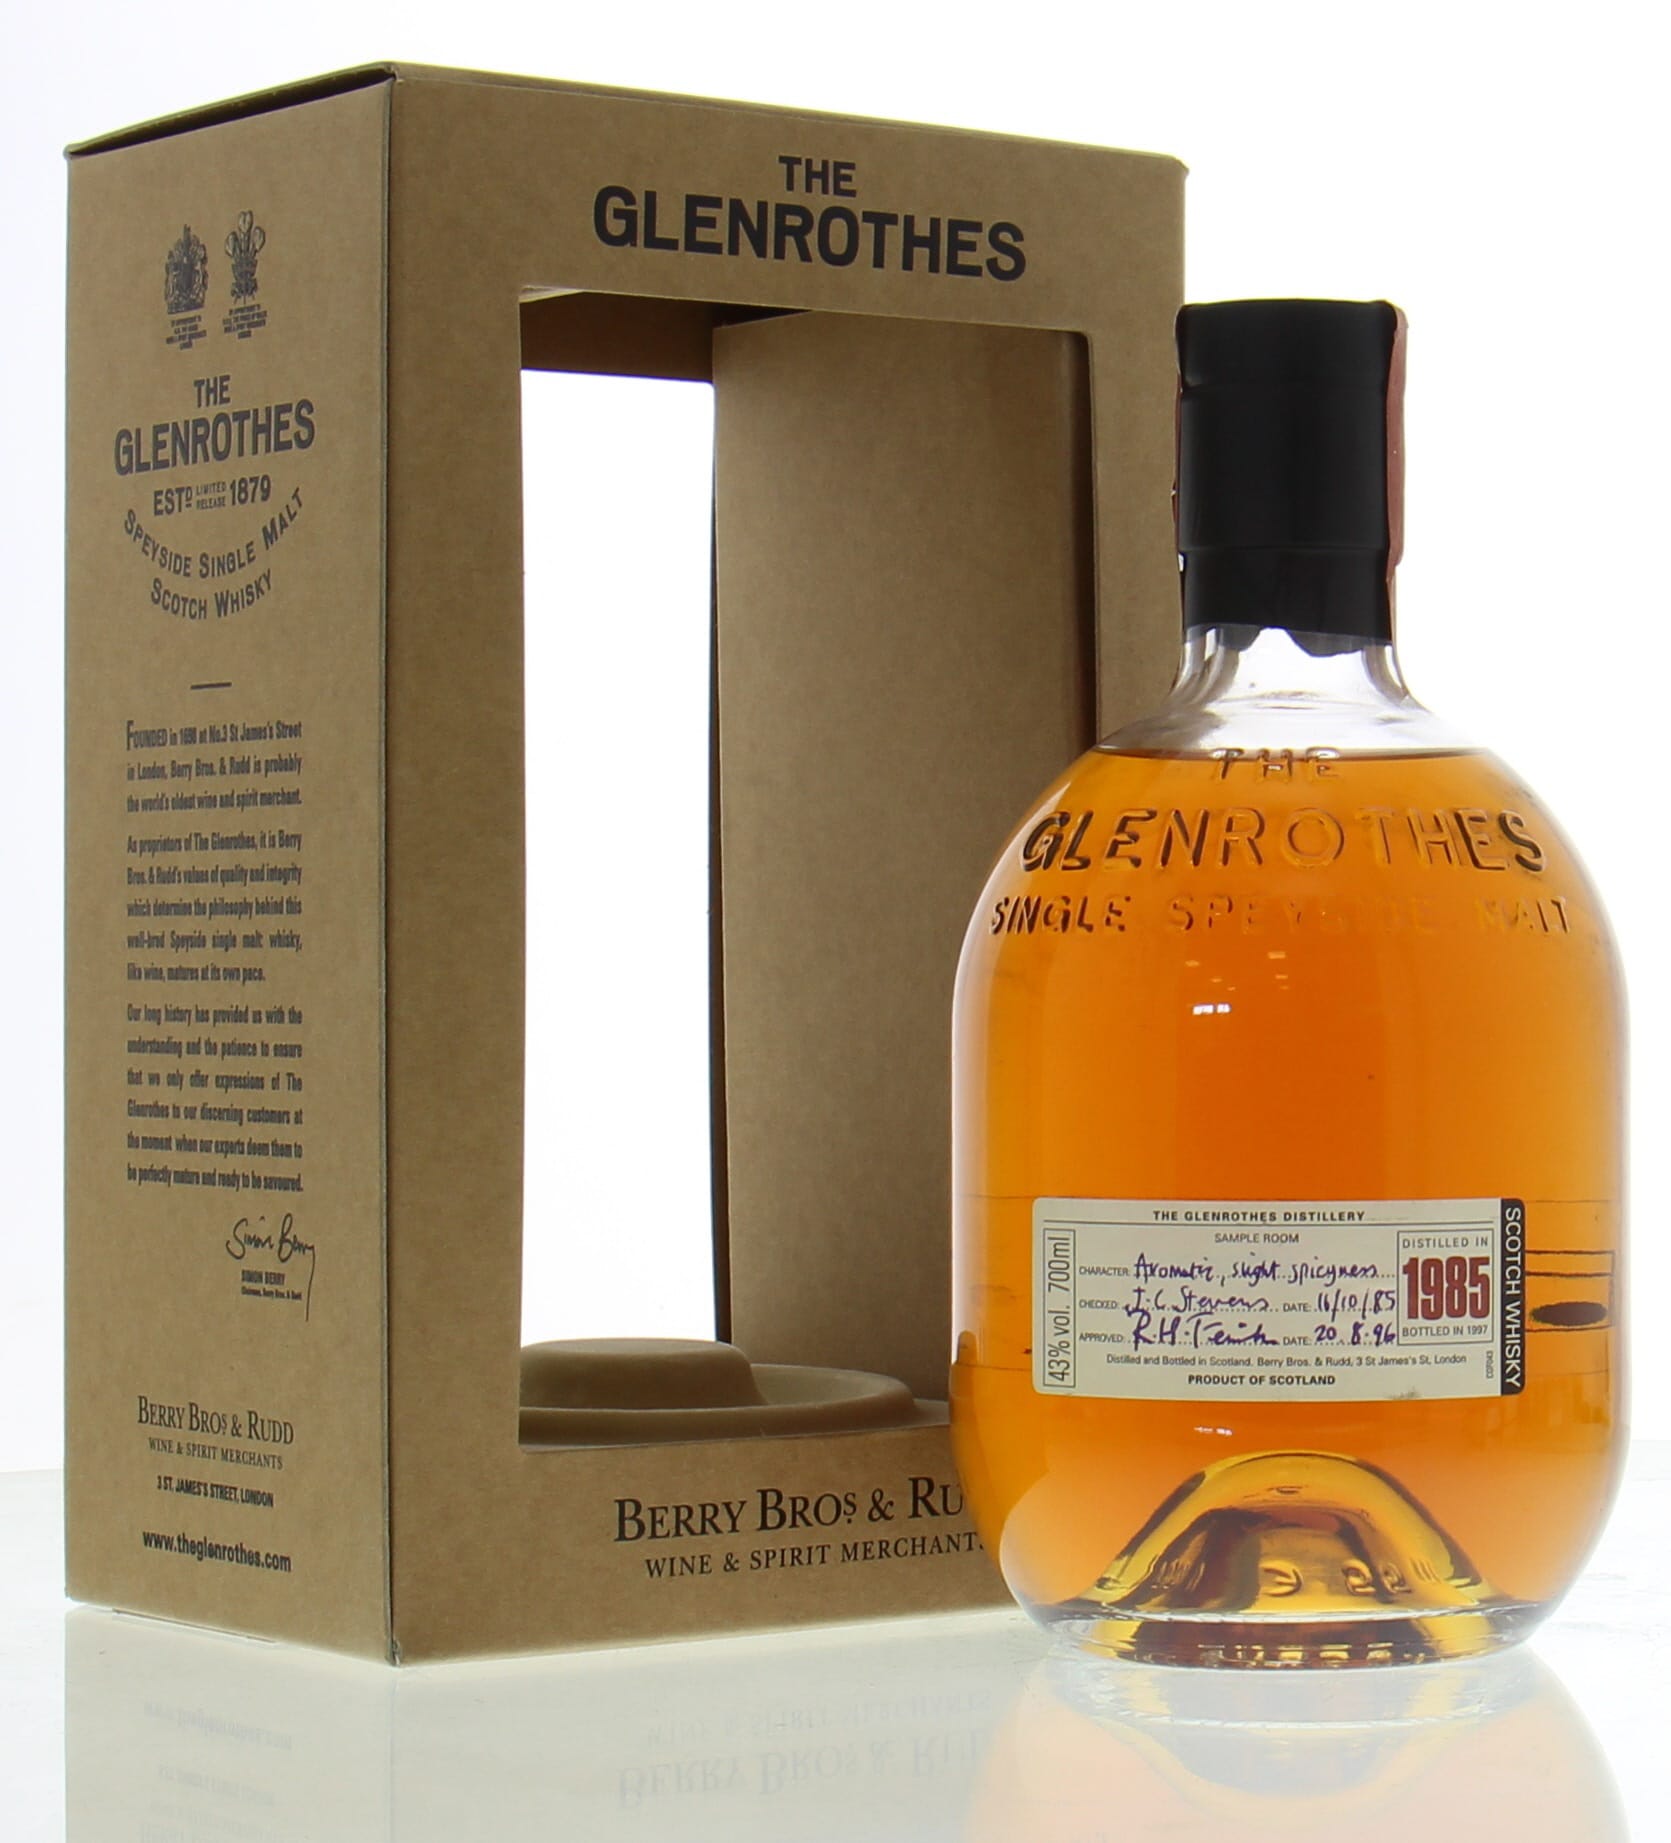 Glenrothes - 1985 Approved: 20.08.96 43% 1985 In Original Container